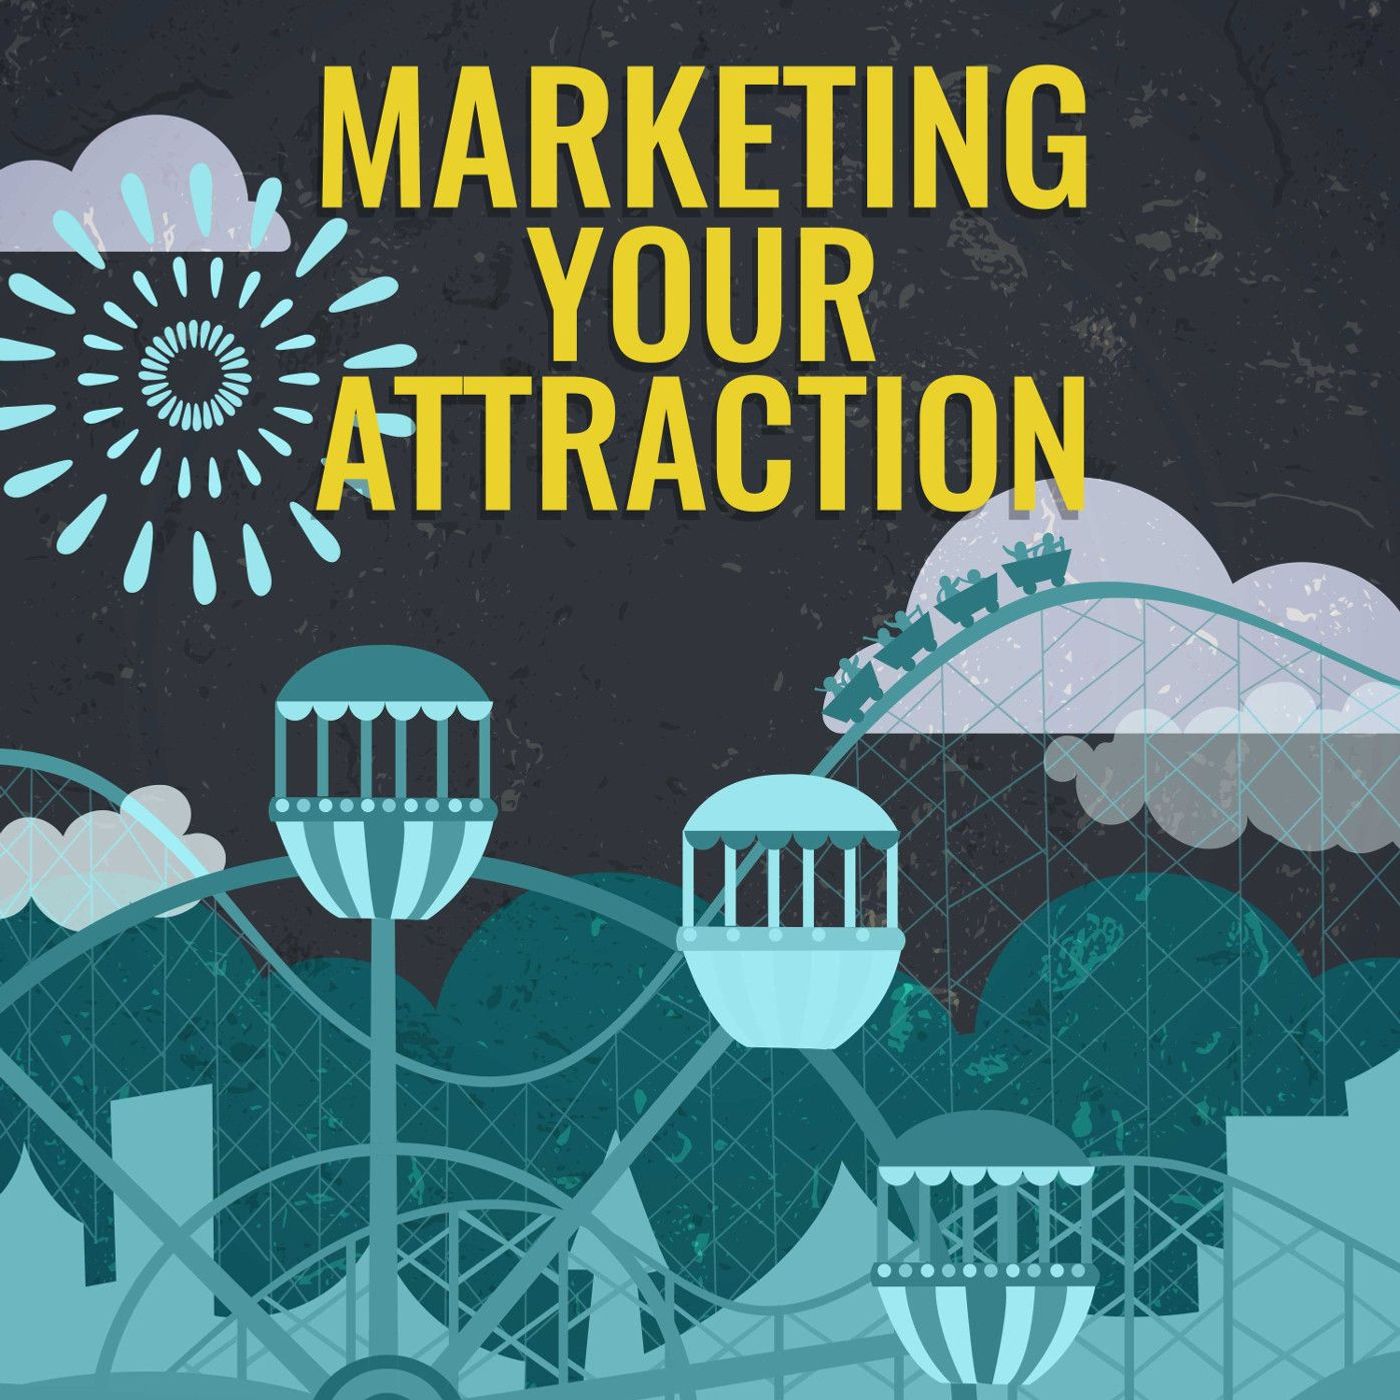 [Marketing Your Attraction] The quick & dirty Marketing Plan